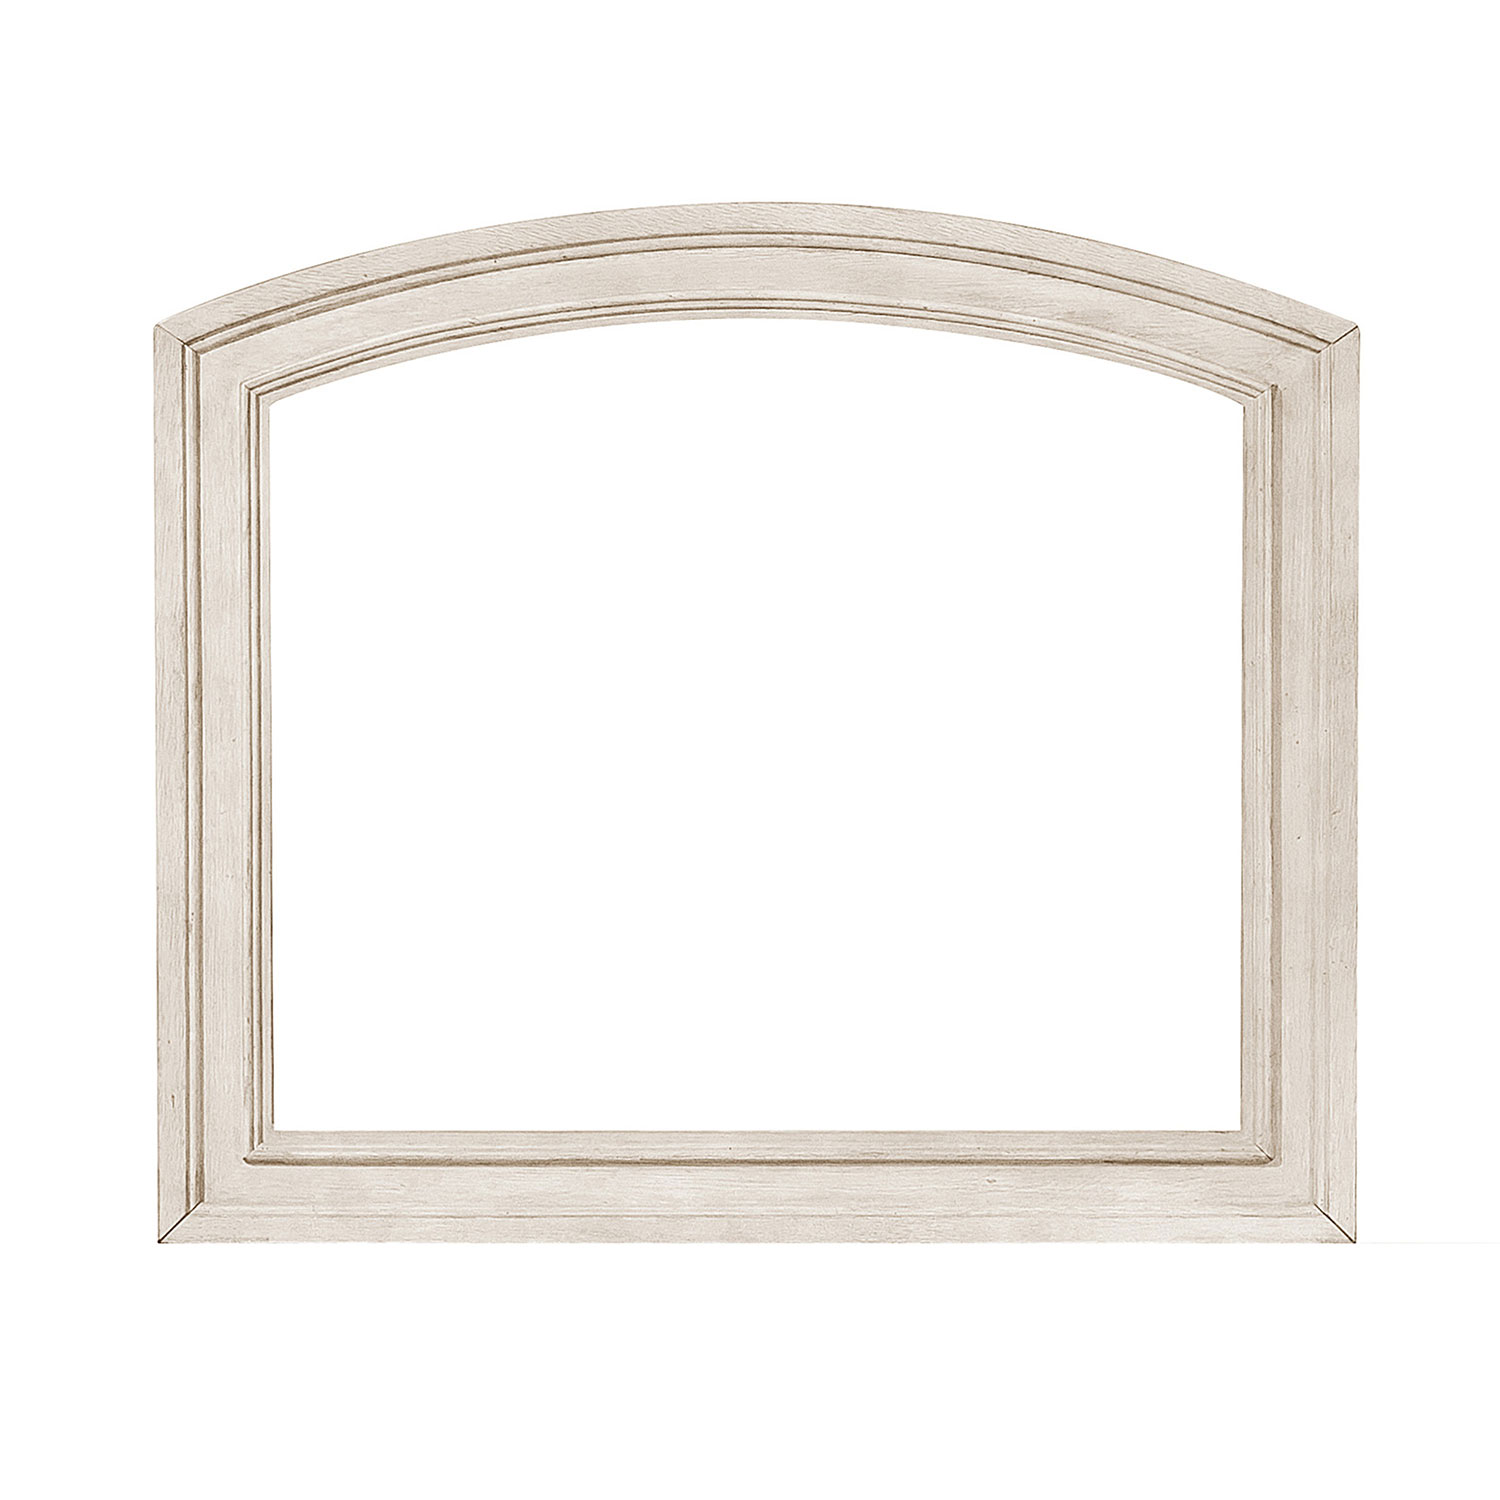 Homelegance Bethel Mirror - Wire-brushed White